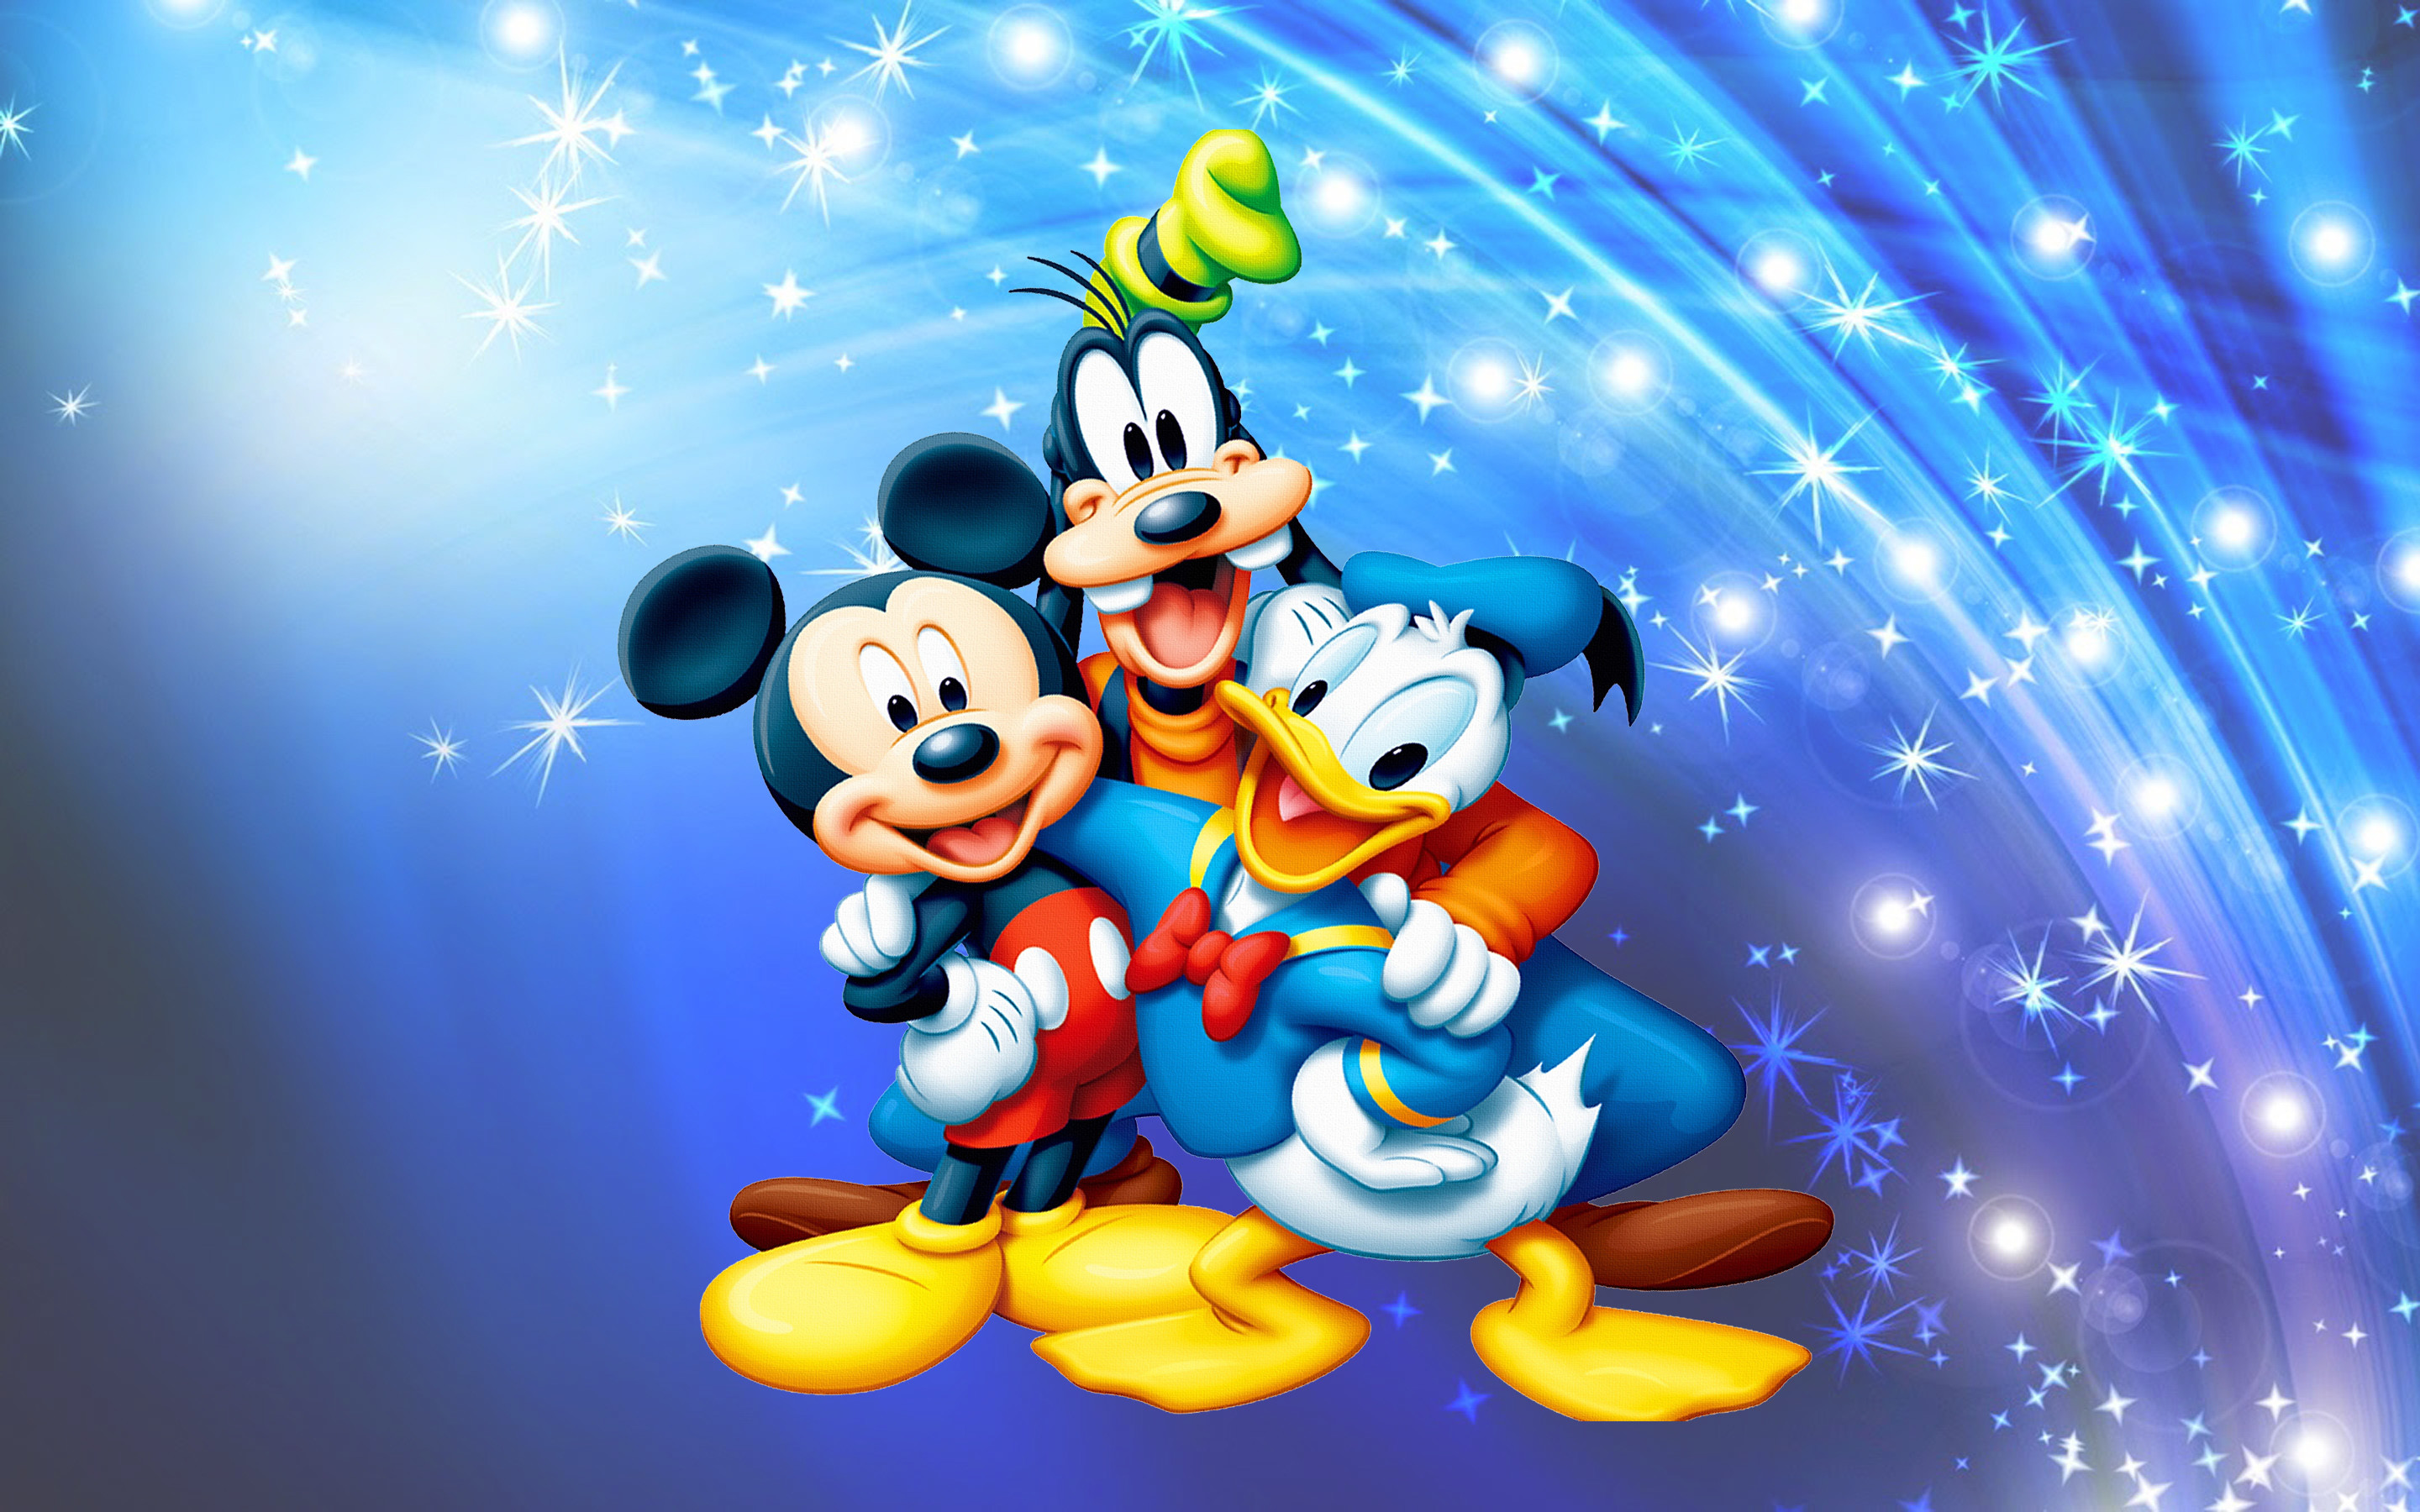 Mickey Mouse Desktop Wallpaper hd picture image